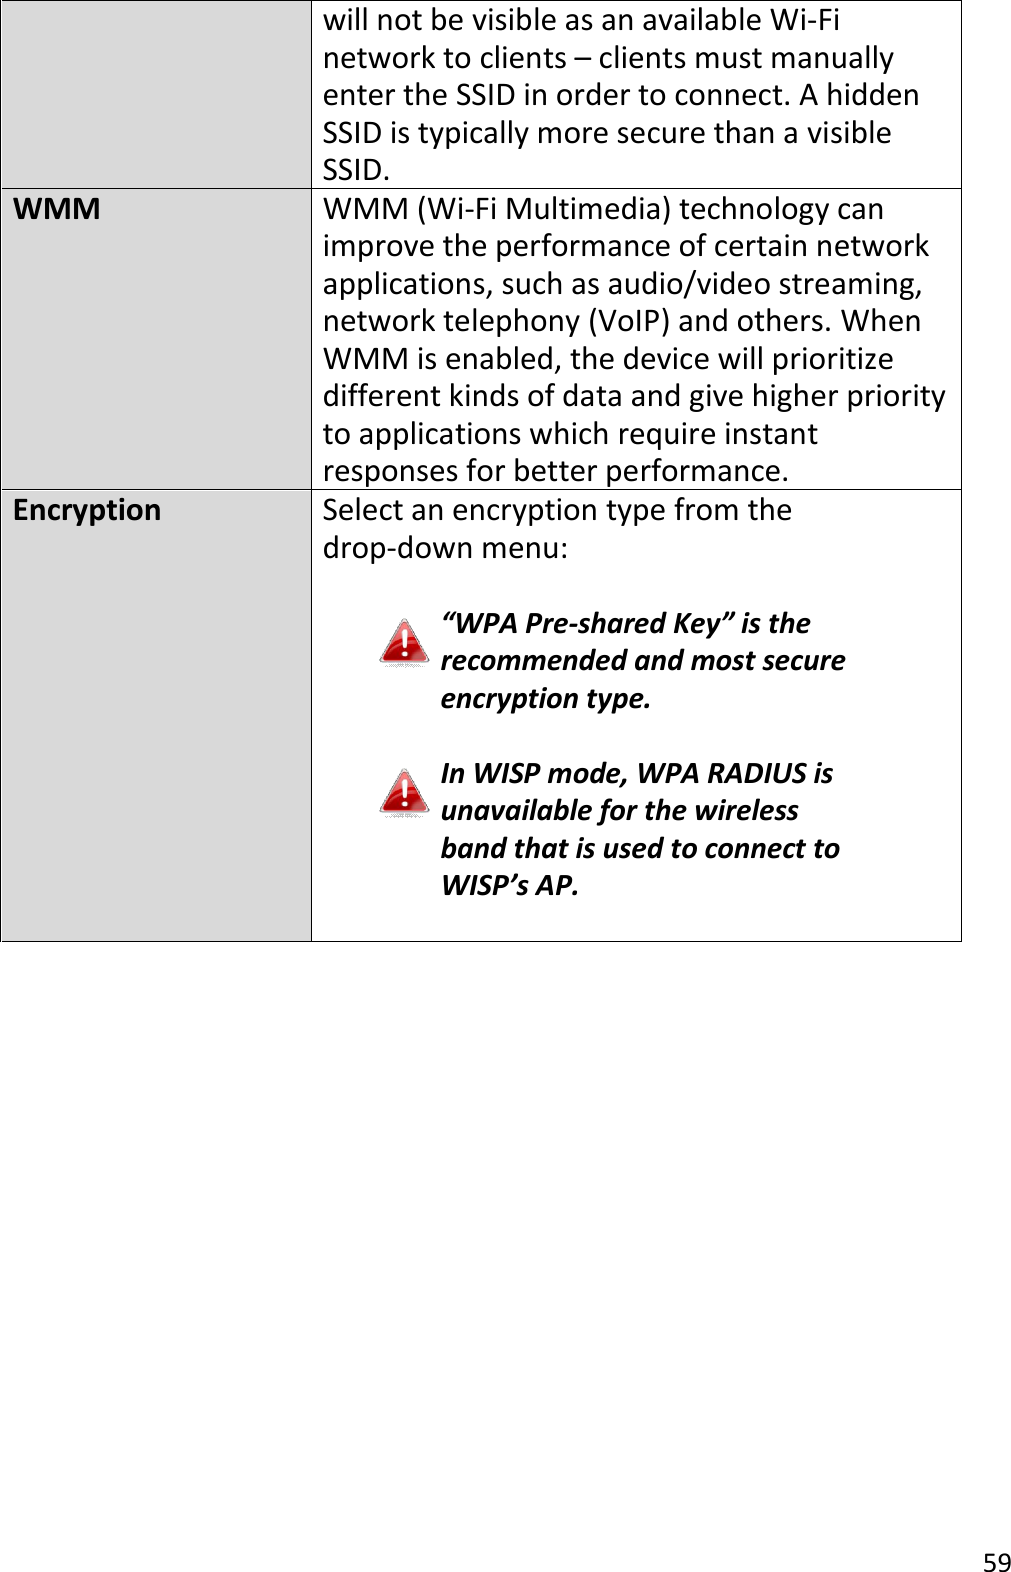 59  will not be visible as an available Wi-Fi network to clients – clients must manually enter the SSID in order to connect. A hidden SSID is typically more secure than a visible SSID. WMM WMM (Wi-Fi Multimedia) technology can improve the performance of certain network applications, such as audio/video streaming, network telephony (VoIP) and others. When WMM is enabled, the device will prioritize different kinds of data and give higher priority to applications which require instant responses for better performance. Encryption Select an encryption type from the drop-down menu:  “WPA Pre-shared Key” is the recommended and most secure encryption type.  In WISP mode, WPA RADIUS is unavailable for the wireless band that is used to connect to WISP’s AP.     